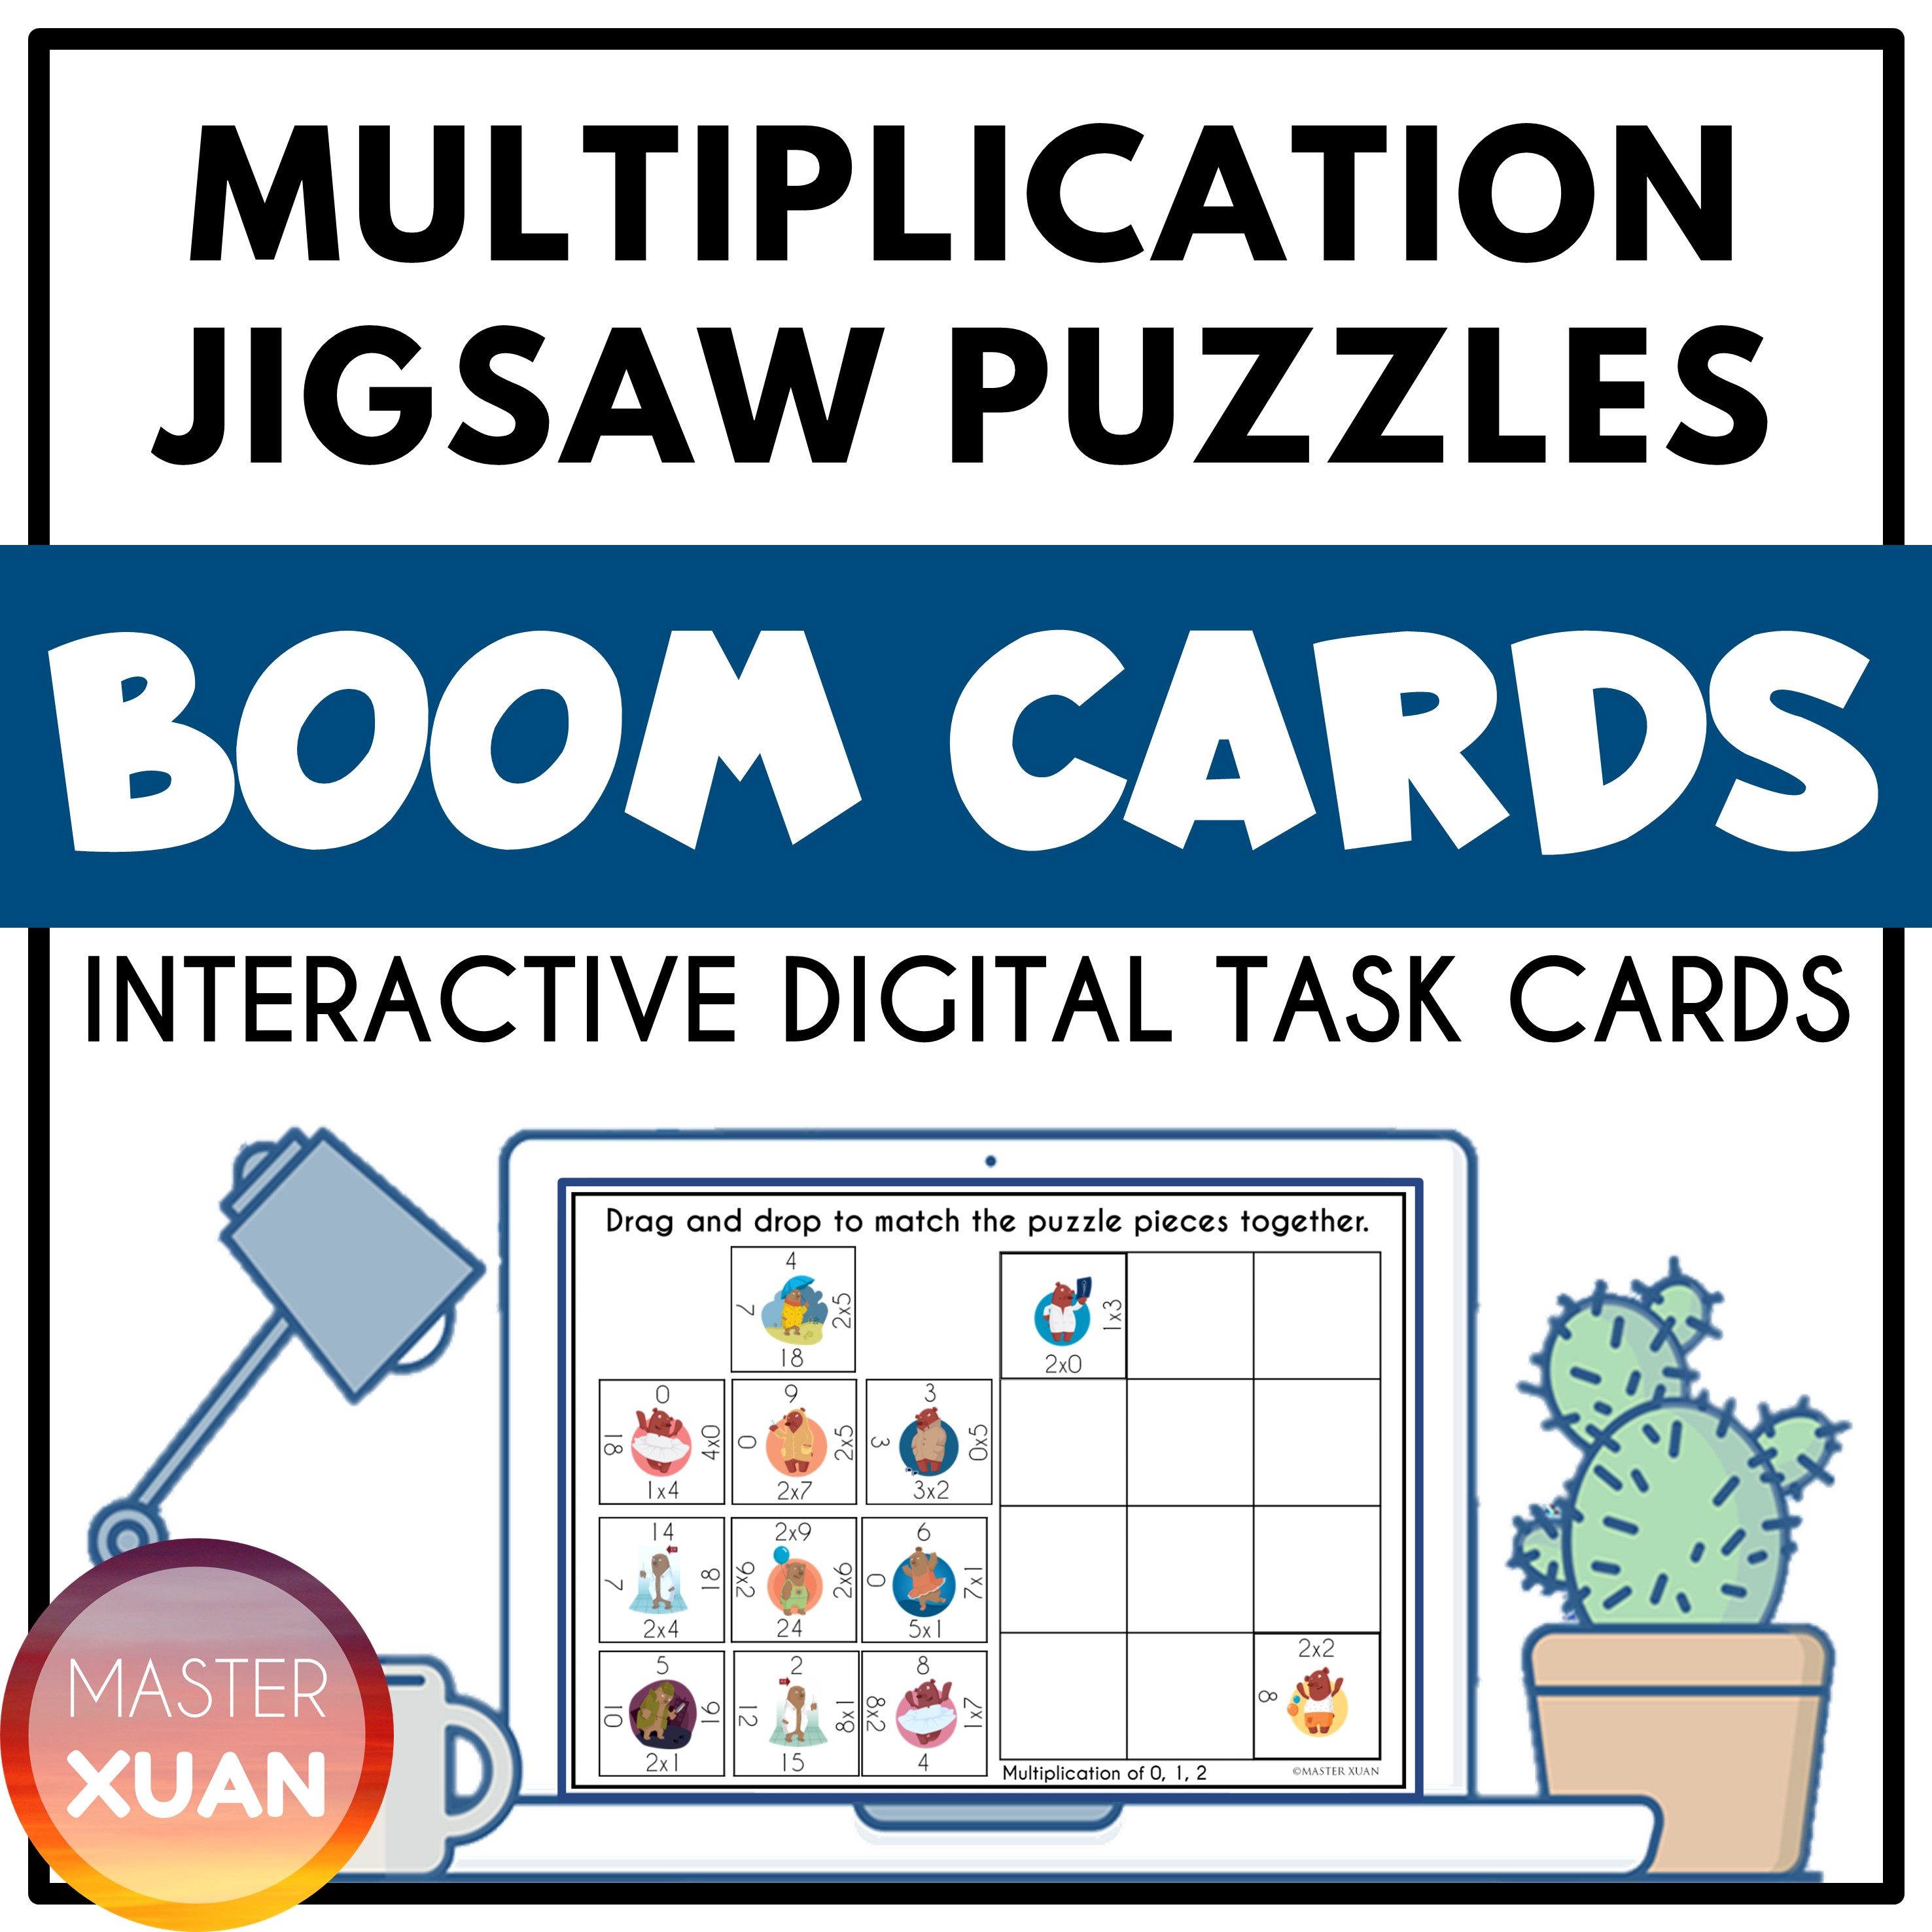 multiplication puzzles 3rd grade cover shows online jigsaw puzzles